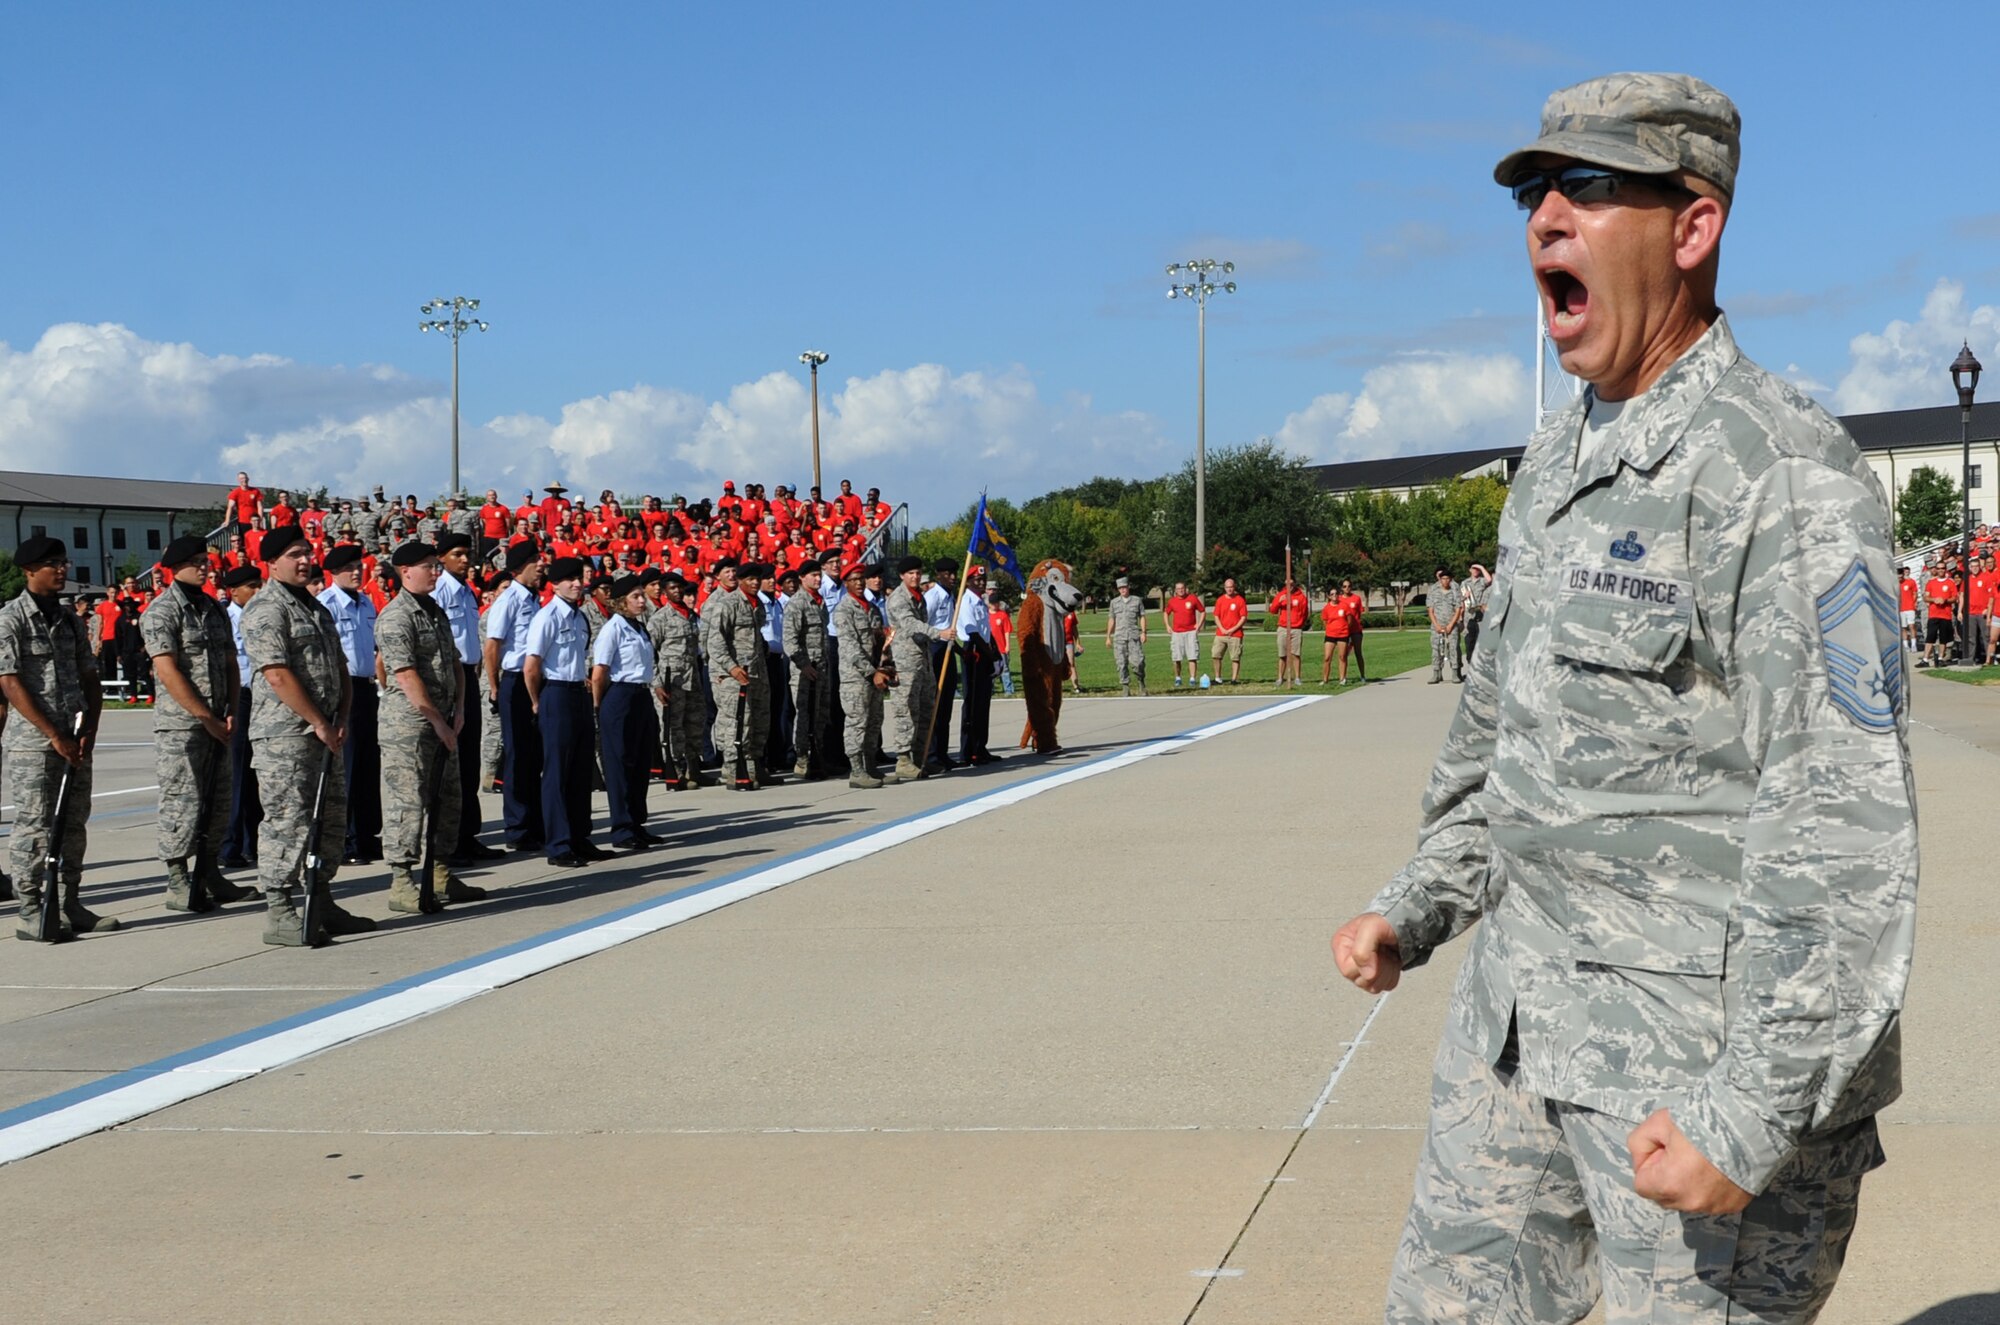 Chief Master Sgt. Robert Winters, 81st Training Group superintendent, yells a chant during the 81st Training Group drill down at the Levitow Training Support Facility drill pad Sept. 9, 2016, on Keesler Air Force Base, Miss. This was his last drill down as the 81st TRG superintendent before retiring with 29 years of service. The 334th TRS “Gators” placed first in open ranks, regulation and overall. (U.S. Air Force photo by Kemberly Groue/Released)